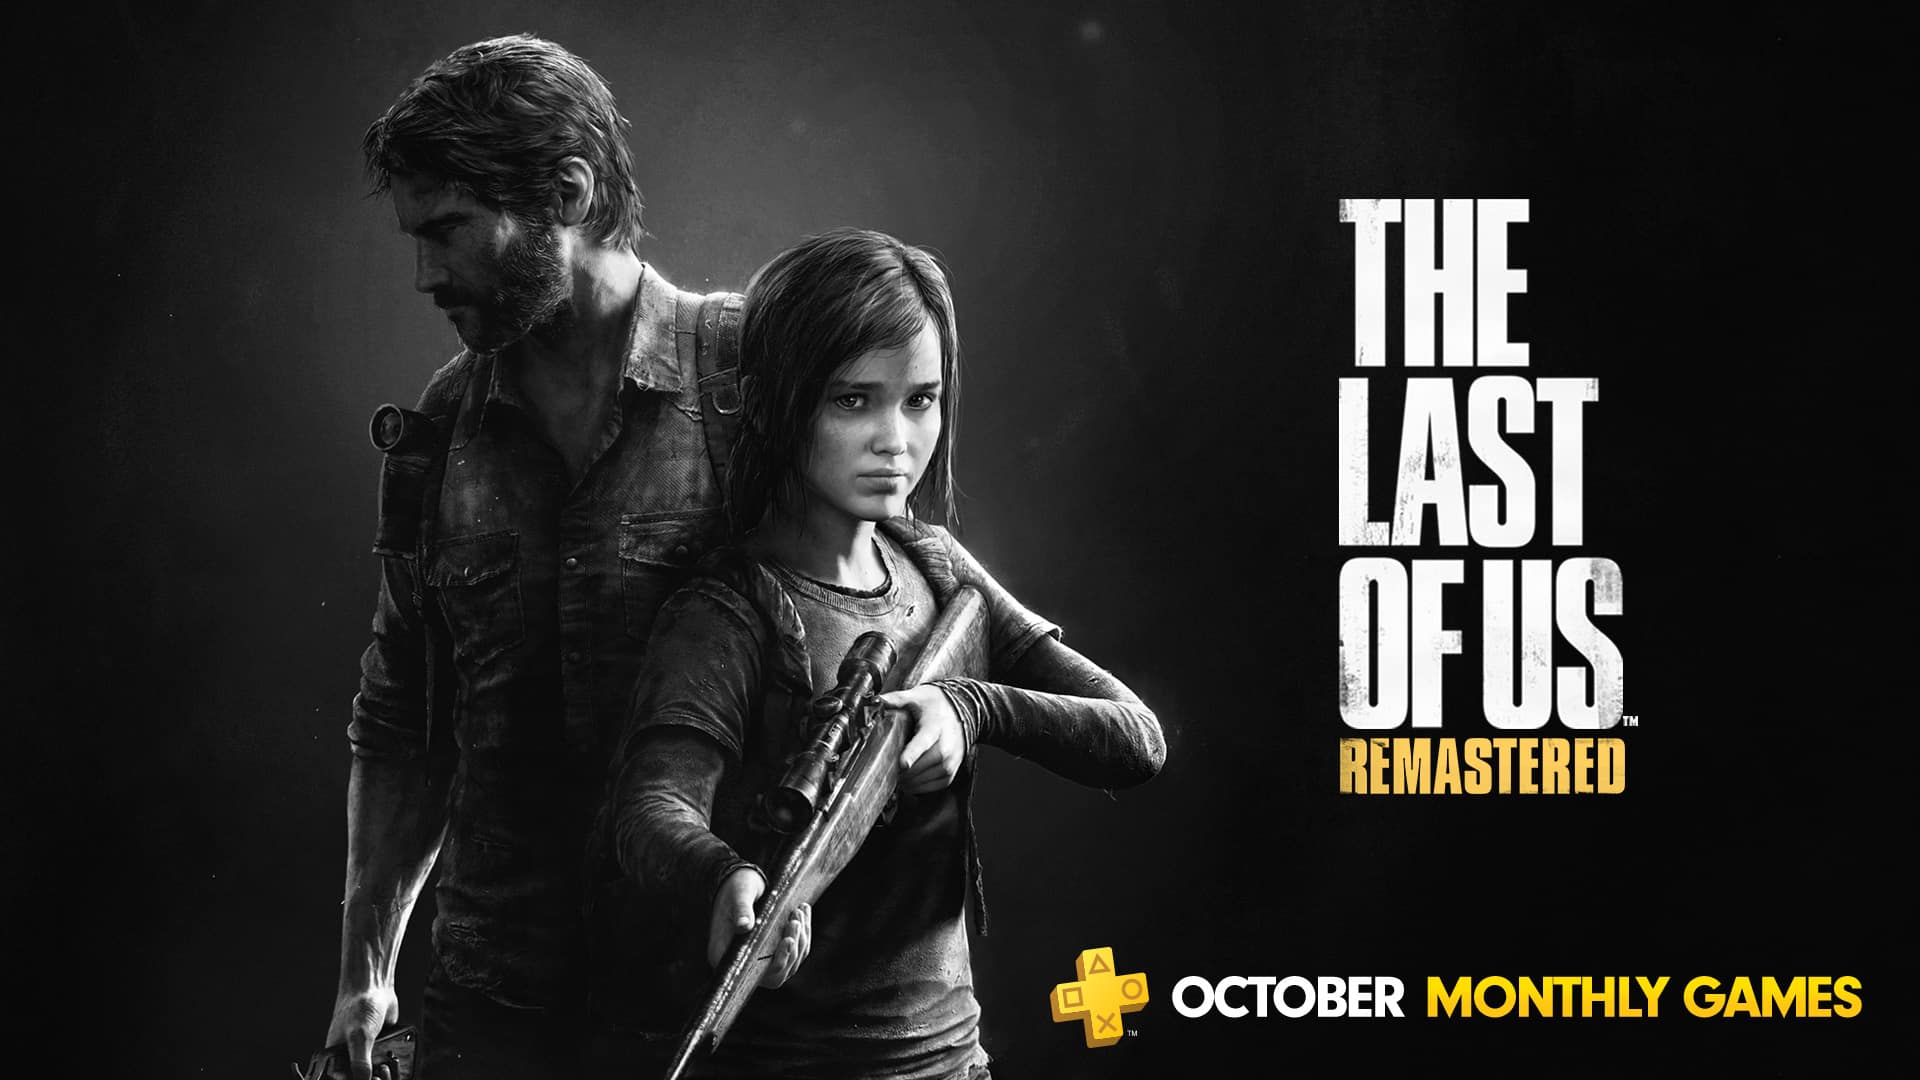 She to live there last year. The last of us 1. Одни из нас (the last of us) ps4.